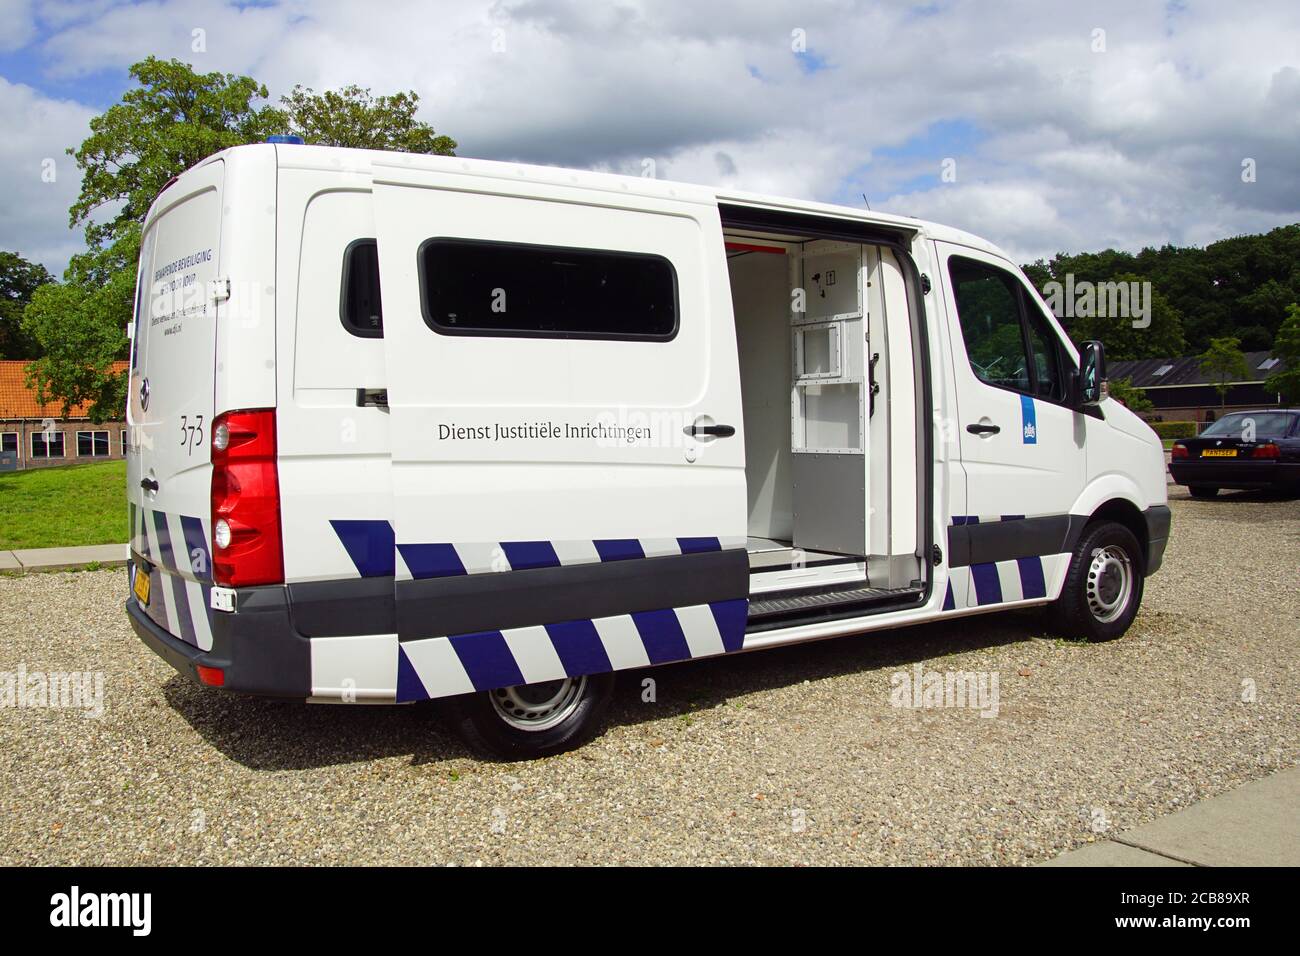 Veenhuizen, the Netherlands - July 29, 2020: Dutch prisoner van parked by the side of the road. Nobody in the vehicle. Stock Photo